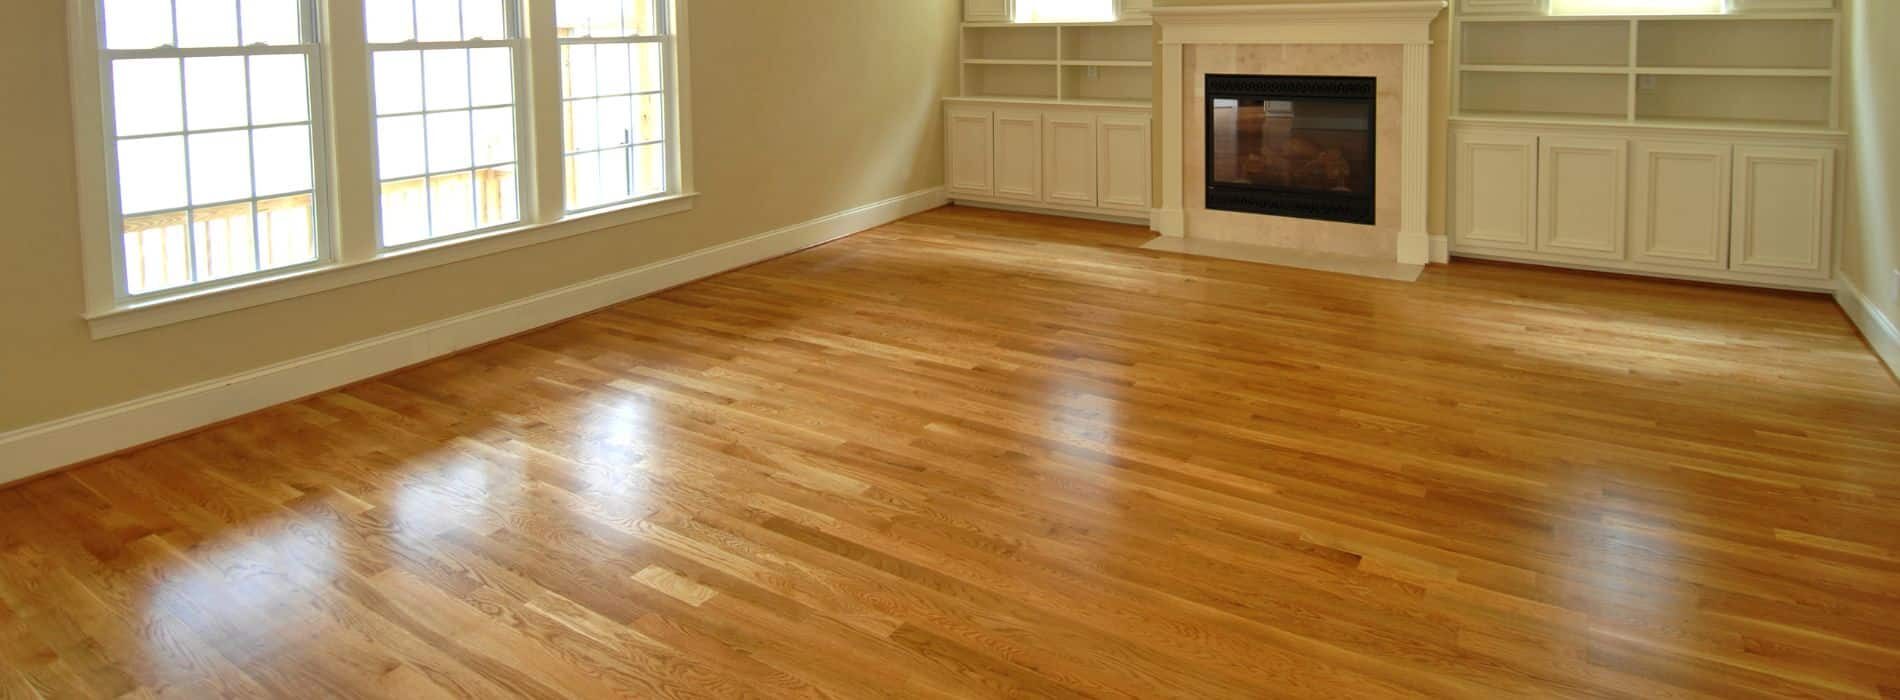 Impeccably restored 6-year-old hardwood floor in Clayhall, IG5. Mr Sander® utilized Bona 2.5K Frost whitewashing and Traffic HD 18% sheen matte lacquer for a stunning finish. With exceptional durability, this treatment ensures long-lasting beauty, making it the perfect choice for your flooring needs.